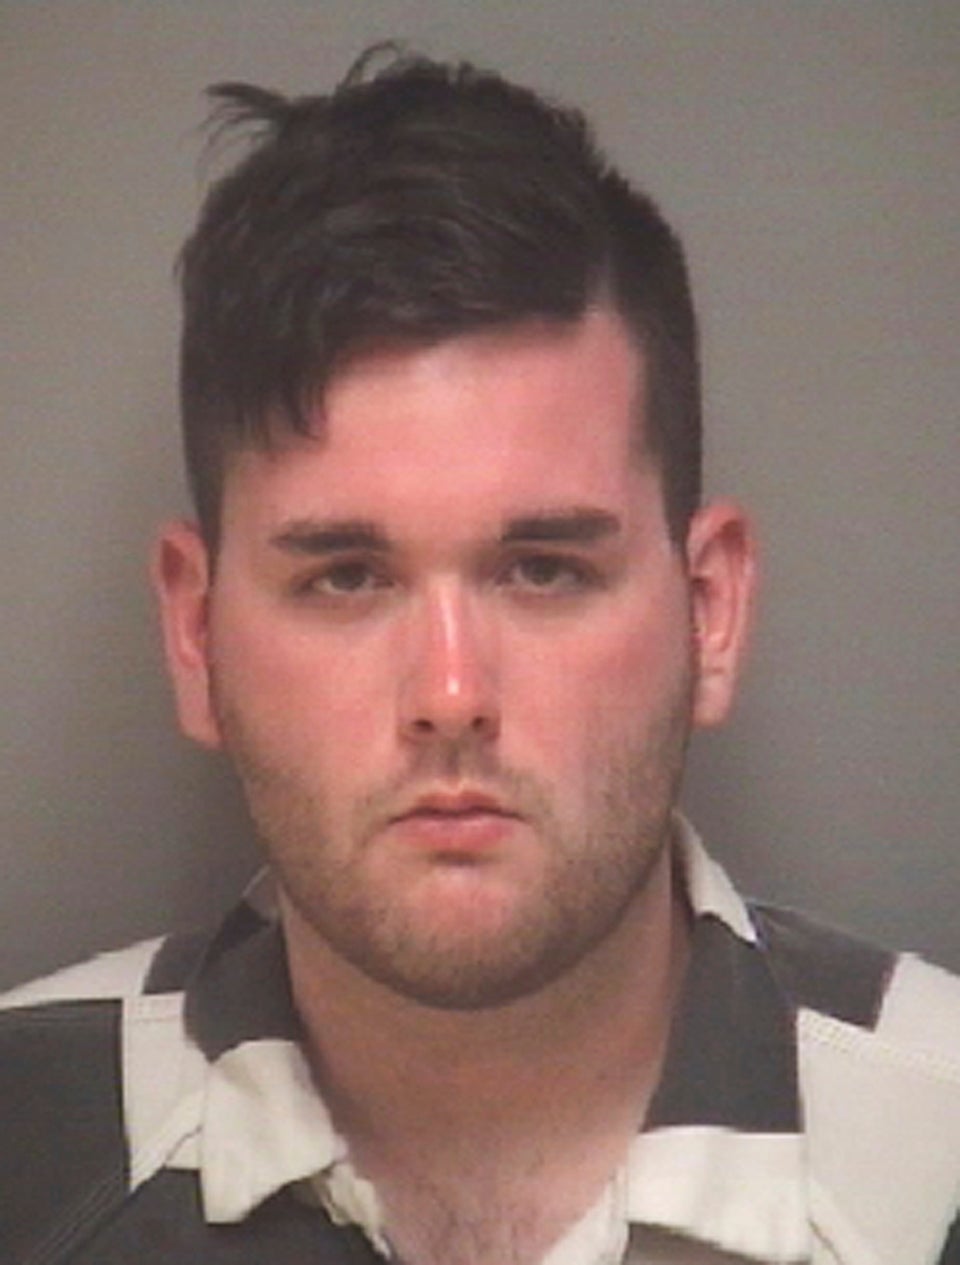 A Man Accused Of Driving Into A Crowd Of Protestors Faces A First-Degree Murder Charge